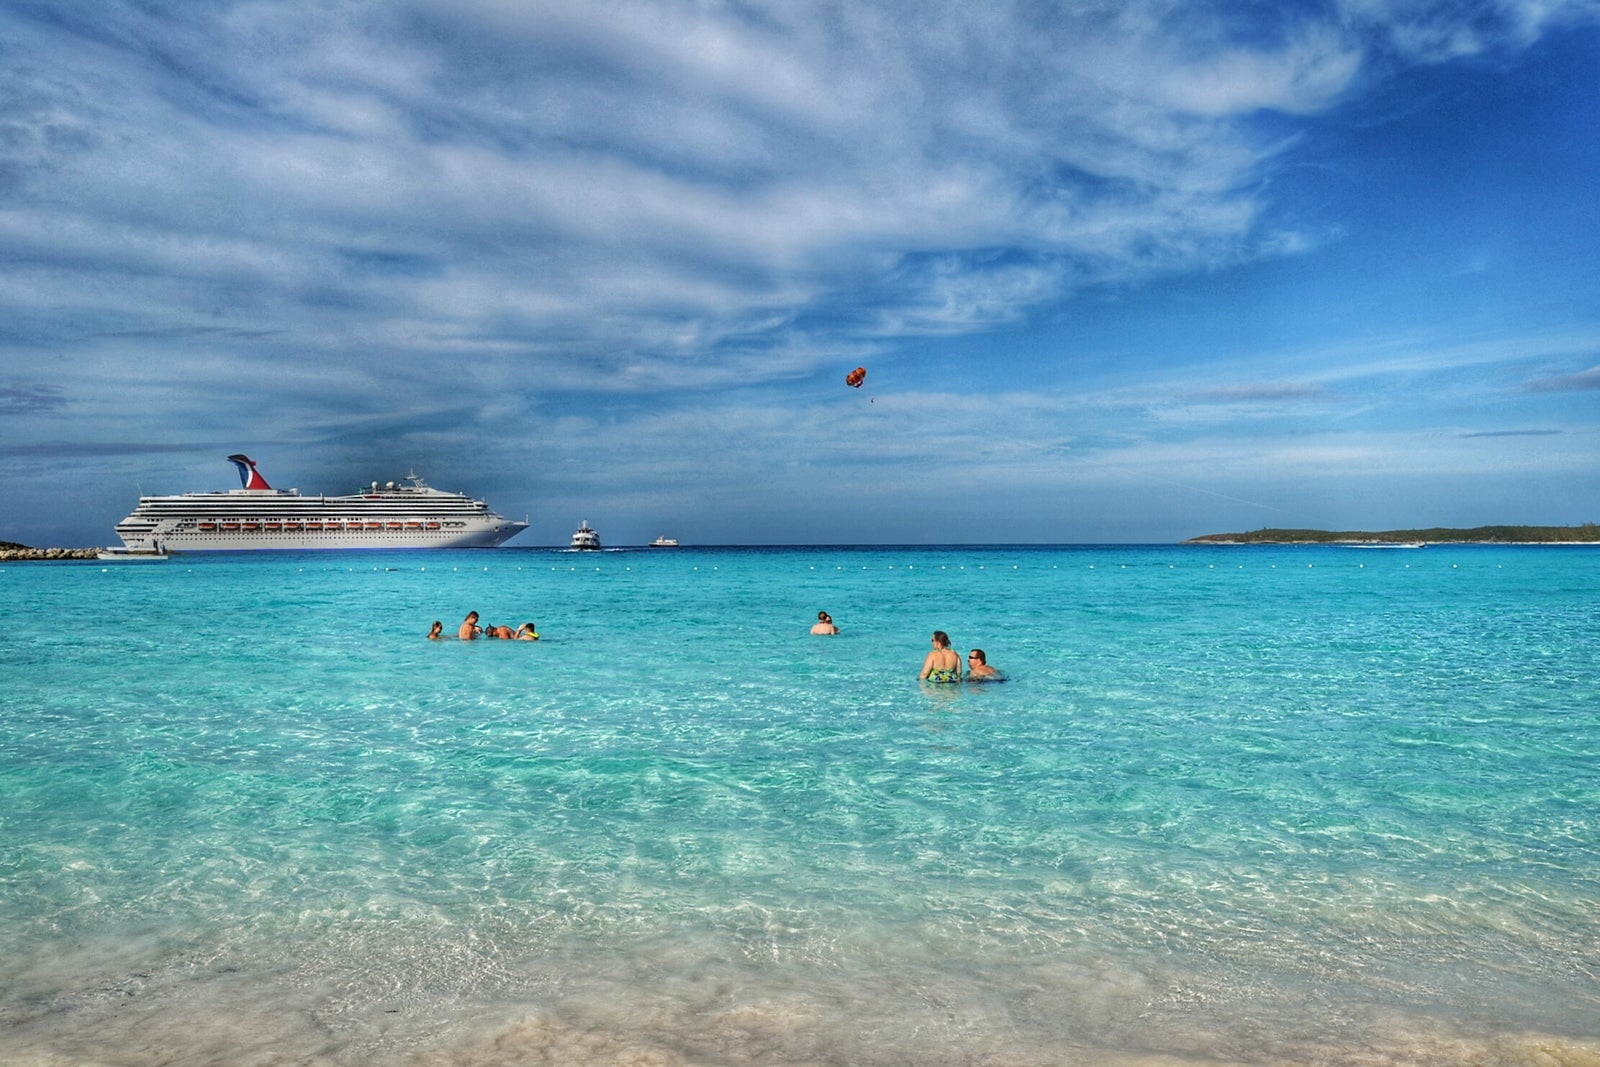 Cruisers in clear, turquoise water near the beach with a cruise ship anchored in the distance